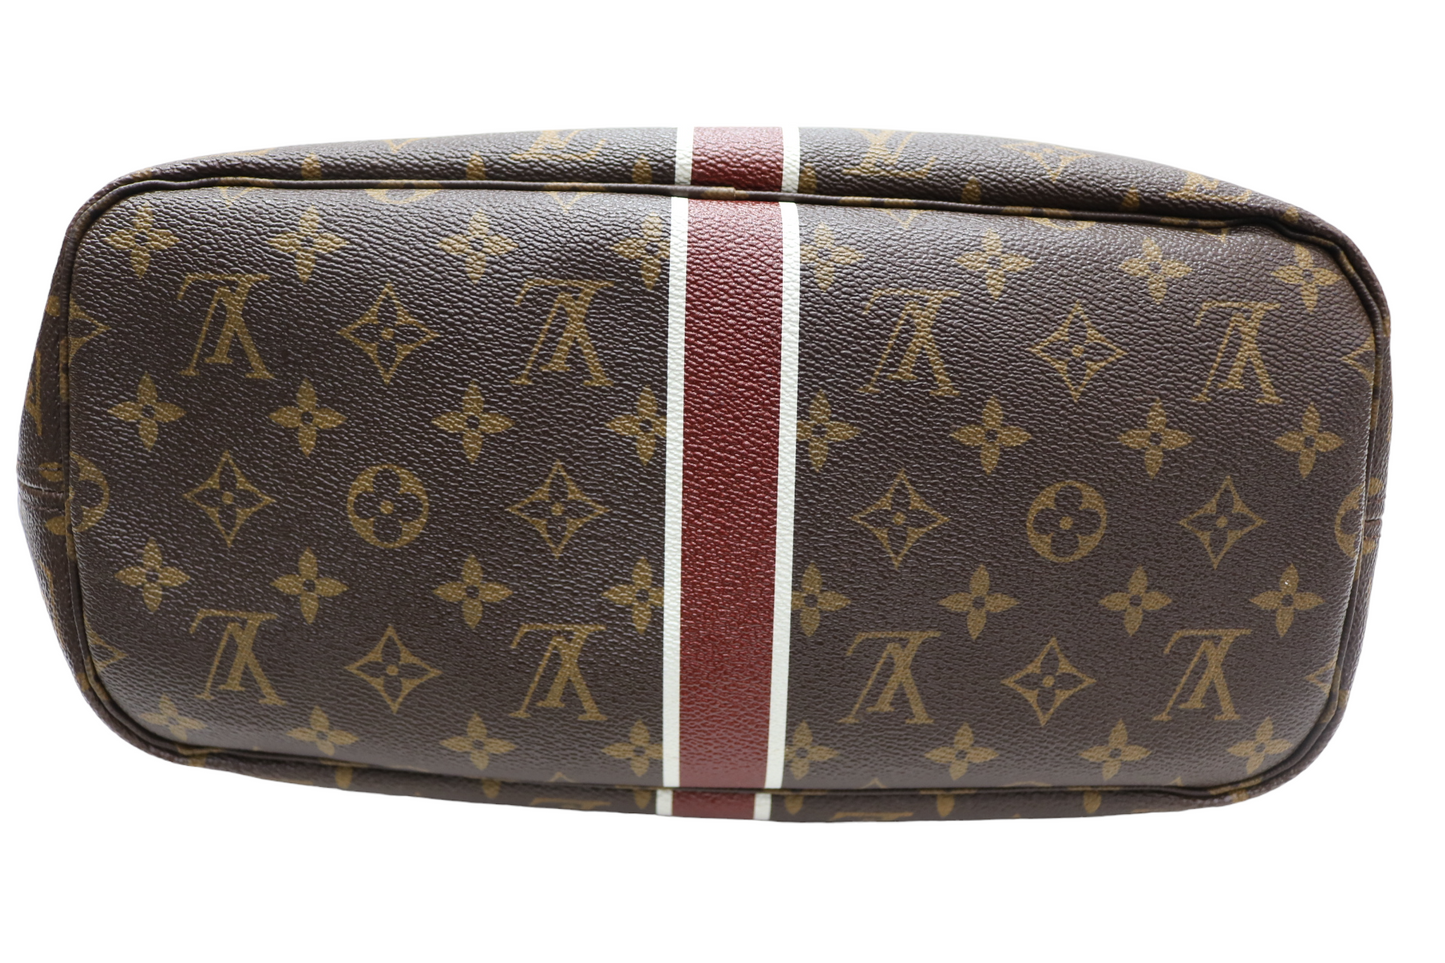 Authentic Louis Vuitton Neverfull Tote MM Brown Canvas/Leather Monogram W/ Initials "A.Z"